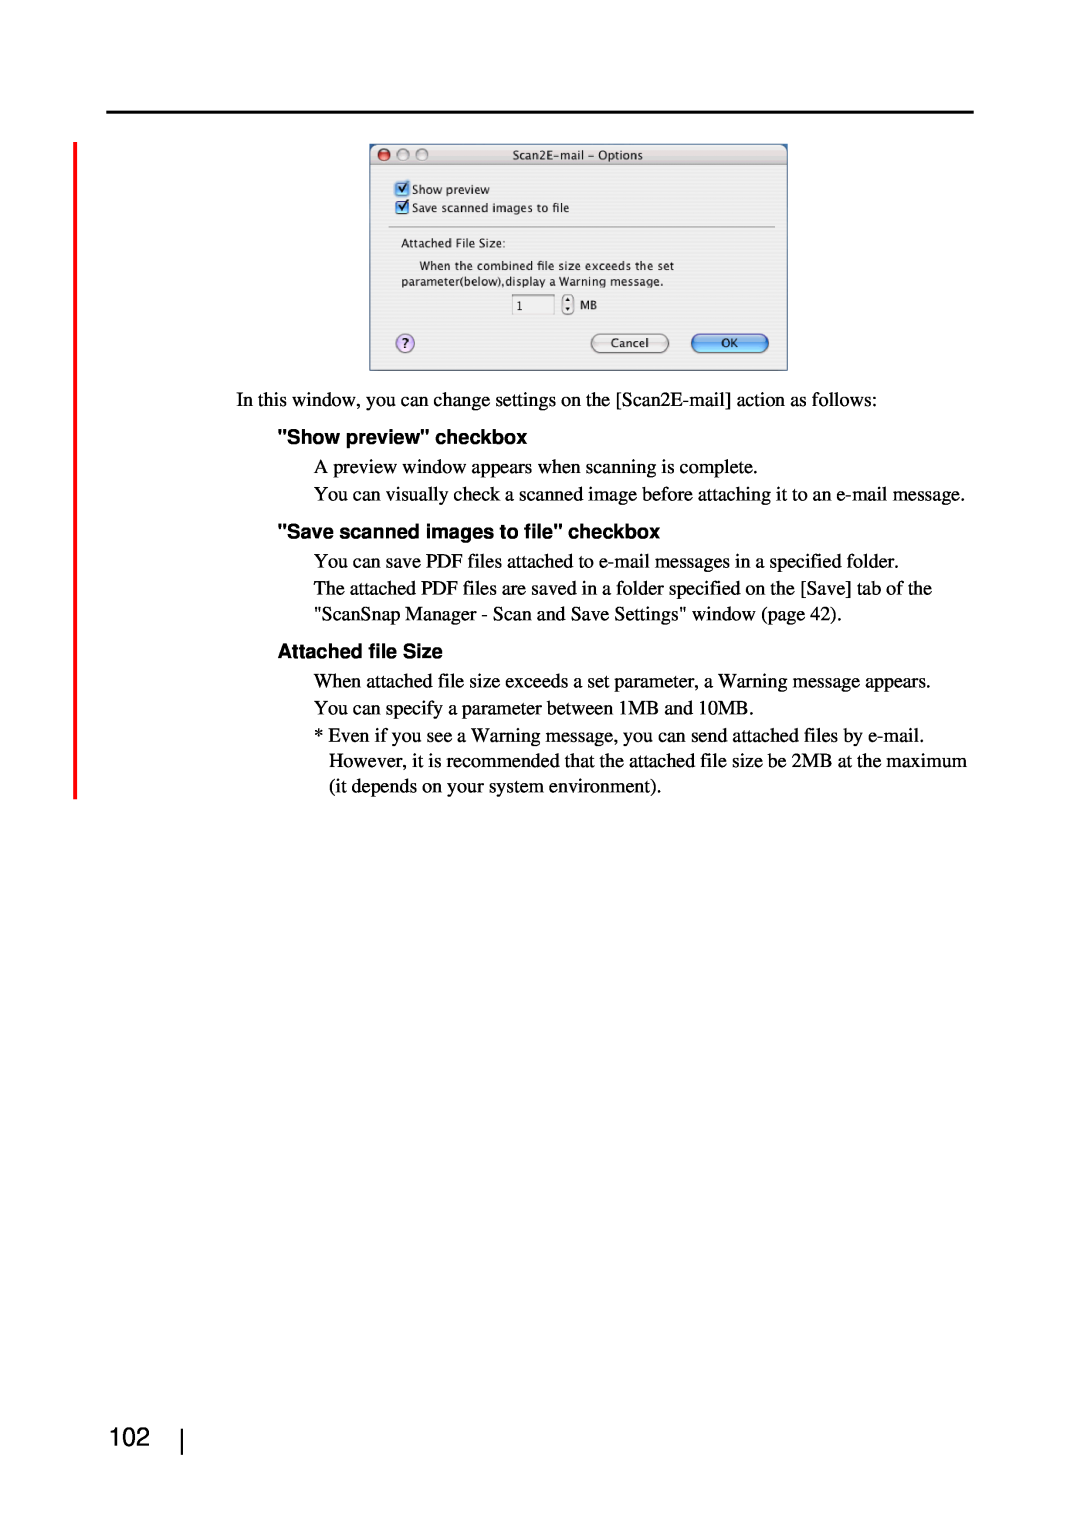 Fujitsu S510M manual Show preview checkbox, Save scanned images to file checkbox, Attached file Size 